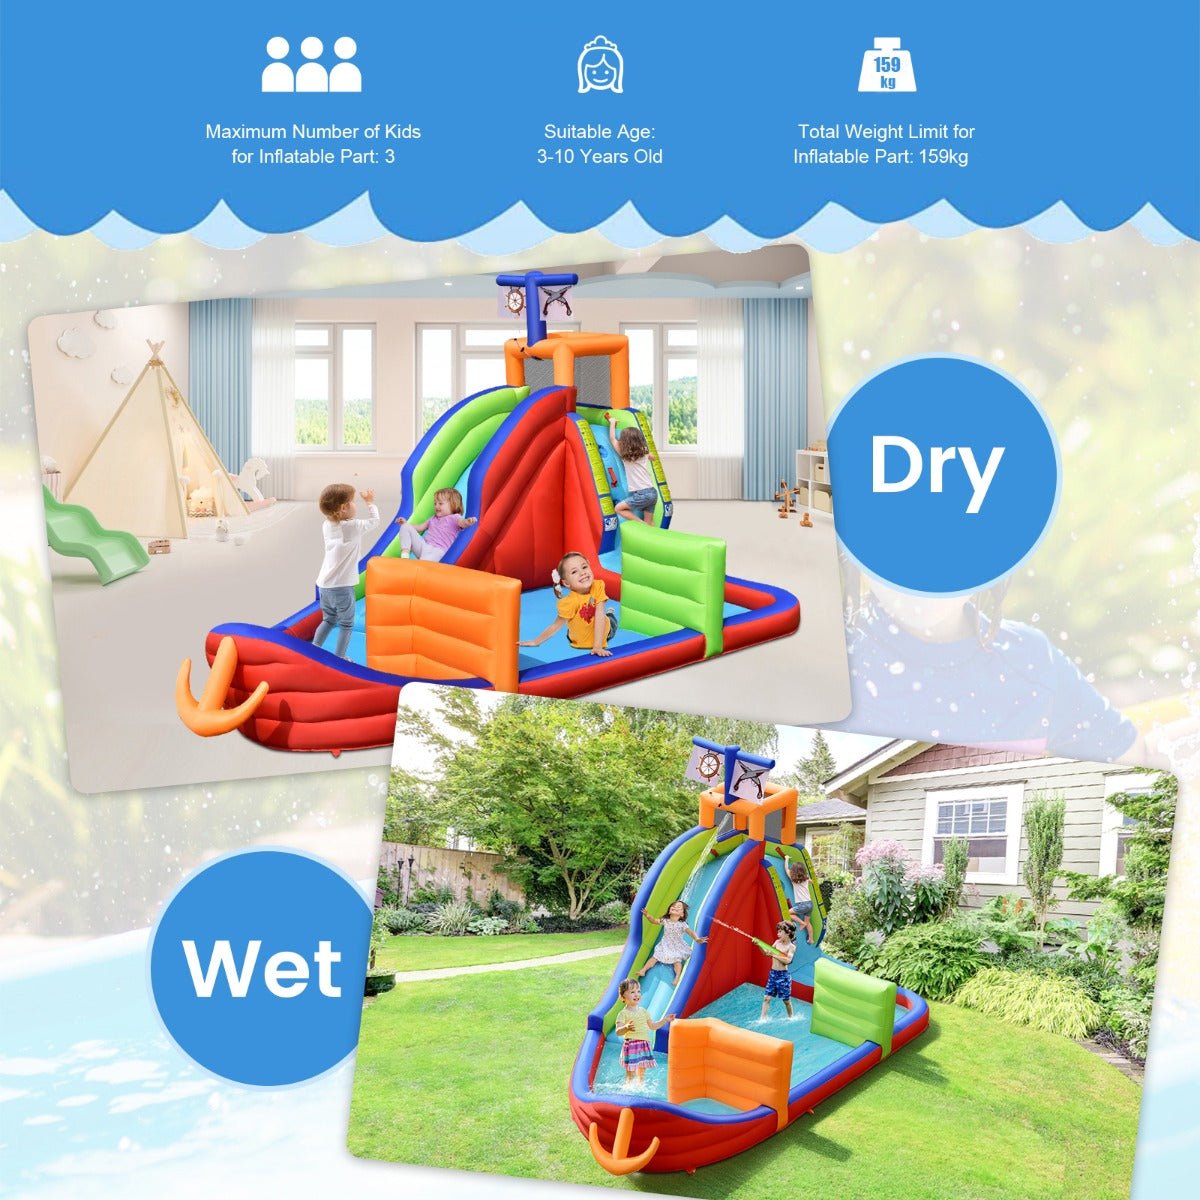 Ahoy, Matey! Pirate-Themed 6-in-1 Inflatable Bounce House with Slide